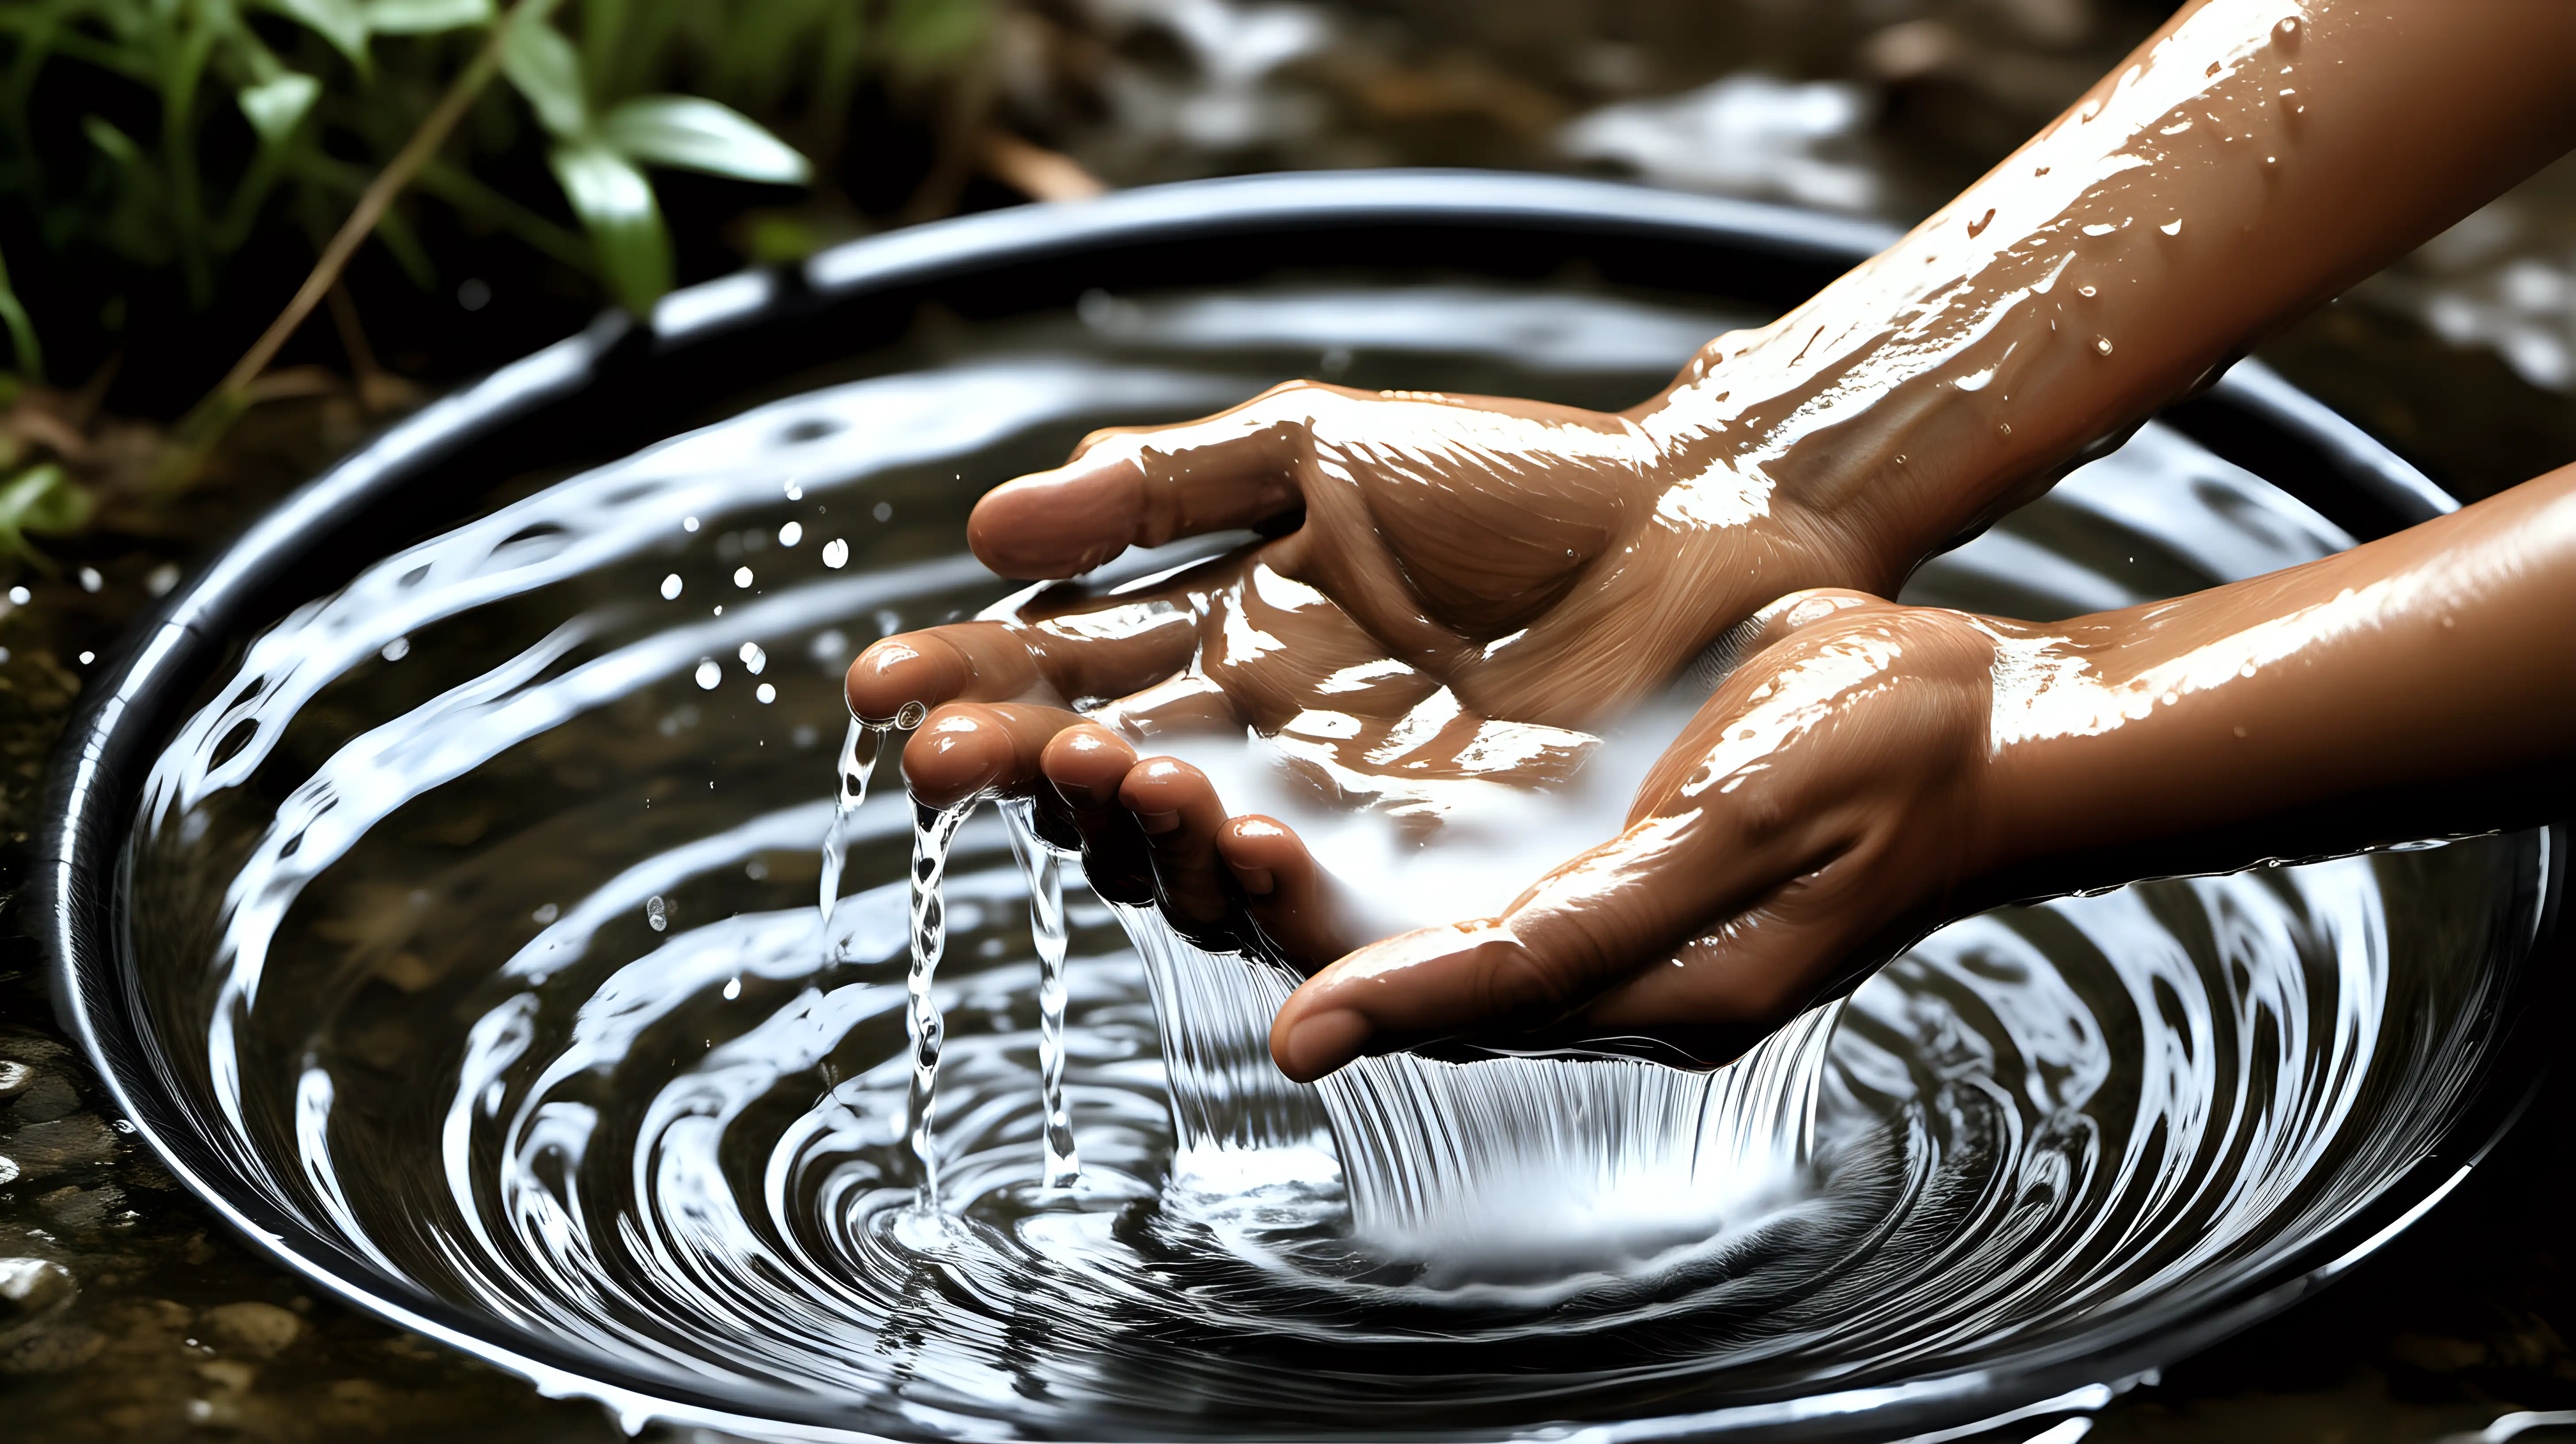 Hands Washing Under Flowing Water Cleanliness Concept Art